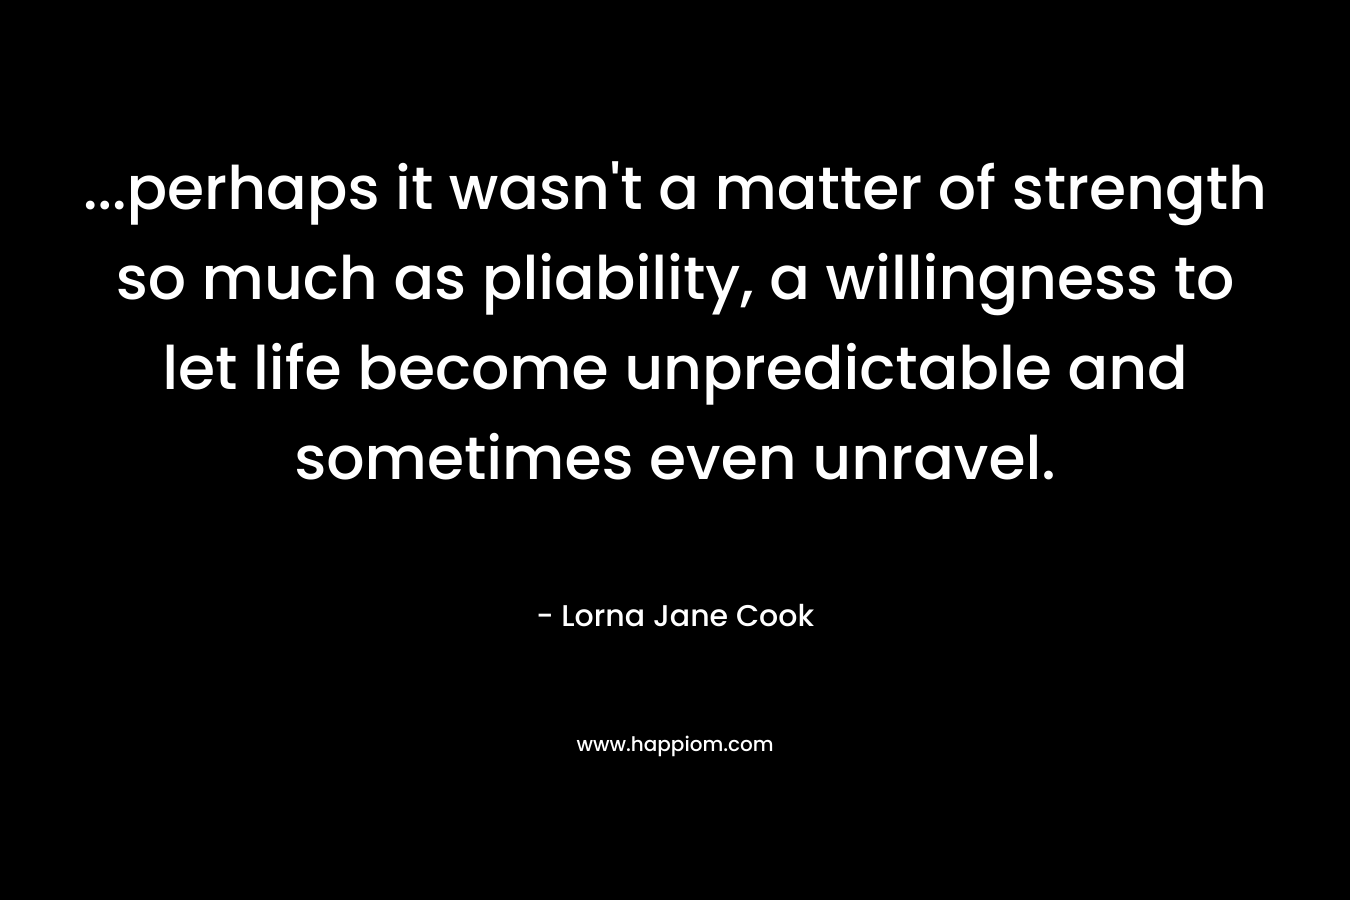 …perhaps it wasn’t a matter of strength so much as pliability, a willingness to let life become unpredictable and sometimes even unravel. – Lorna Jane Cook